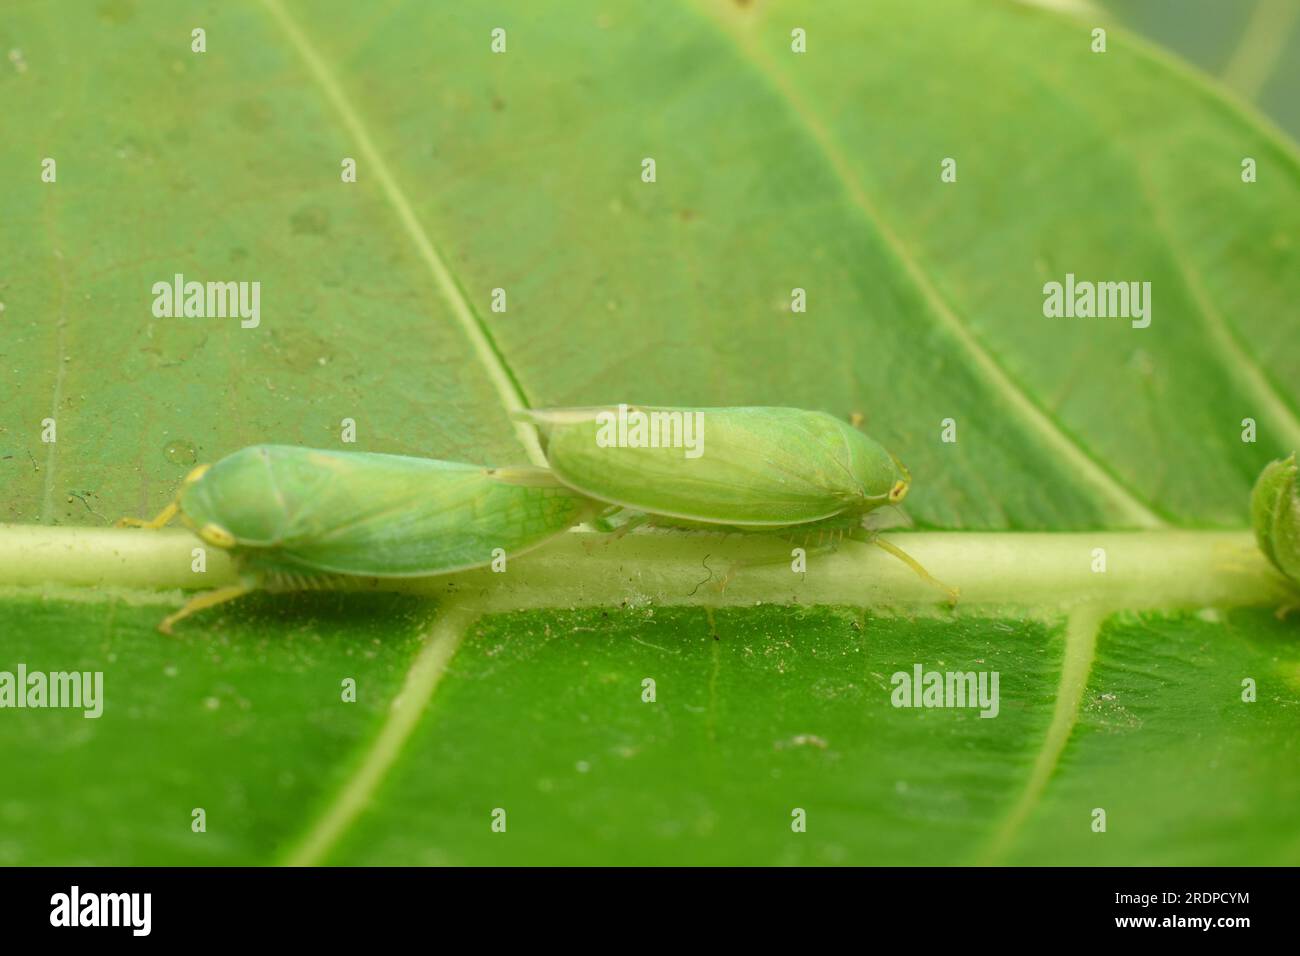 Green leafhoppers mating on leaf. Stock Photo